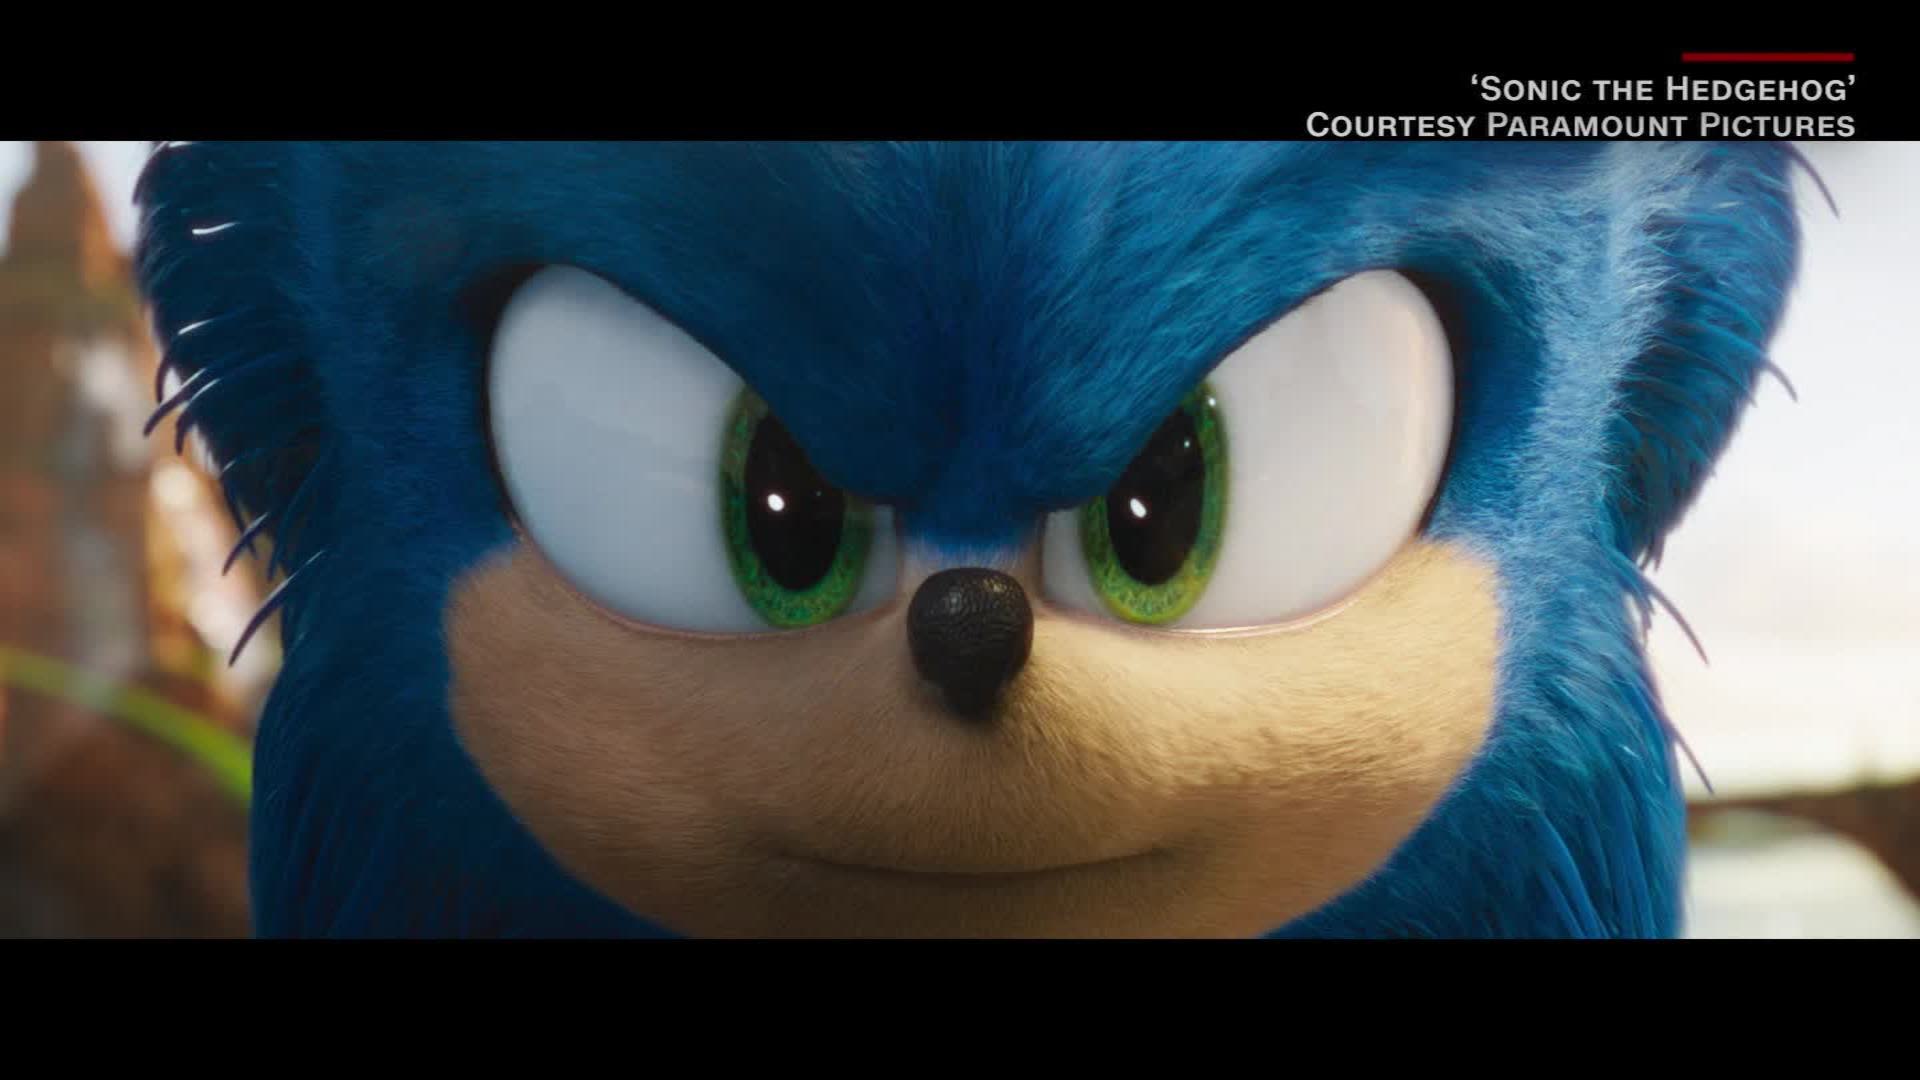 Sonic Brings In Biggest Box Office for Video Game Movie Ever